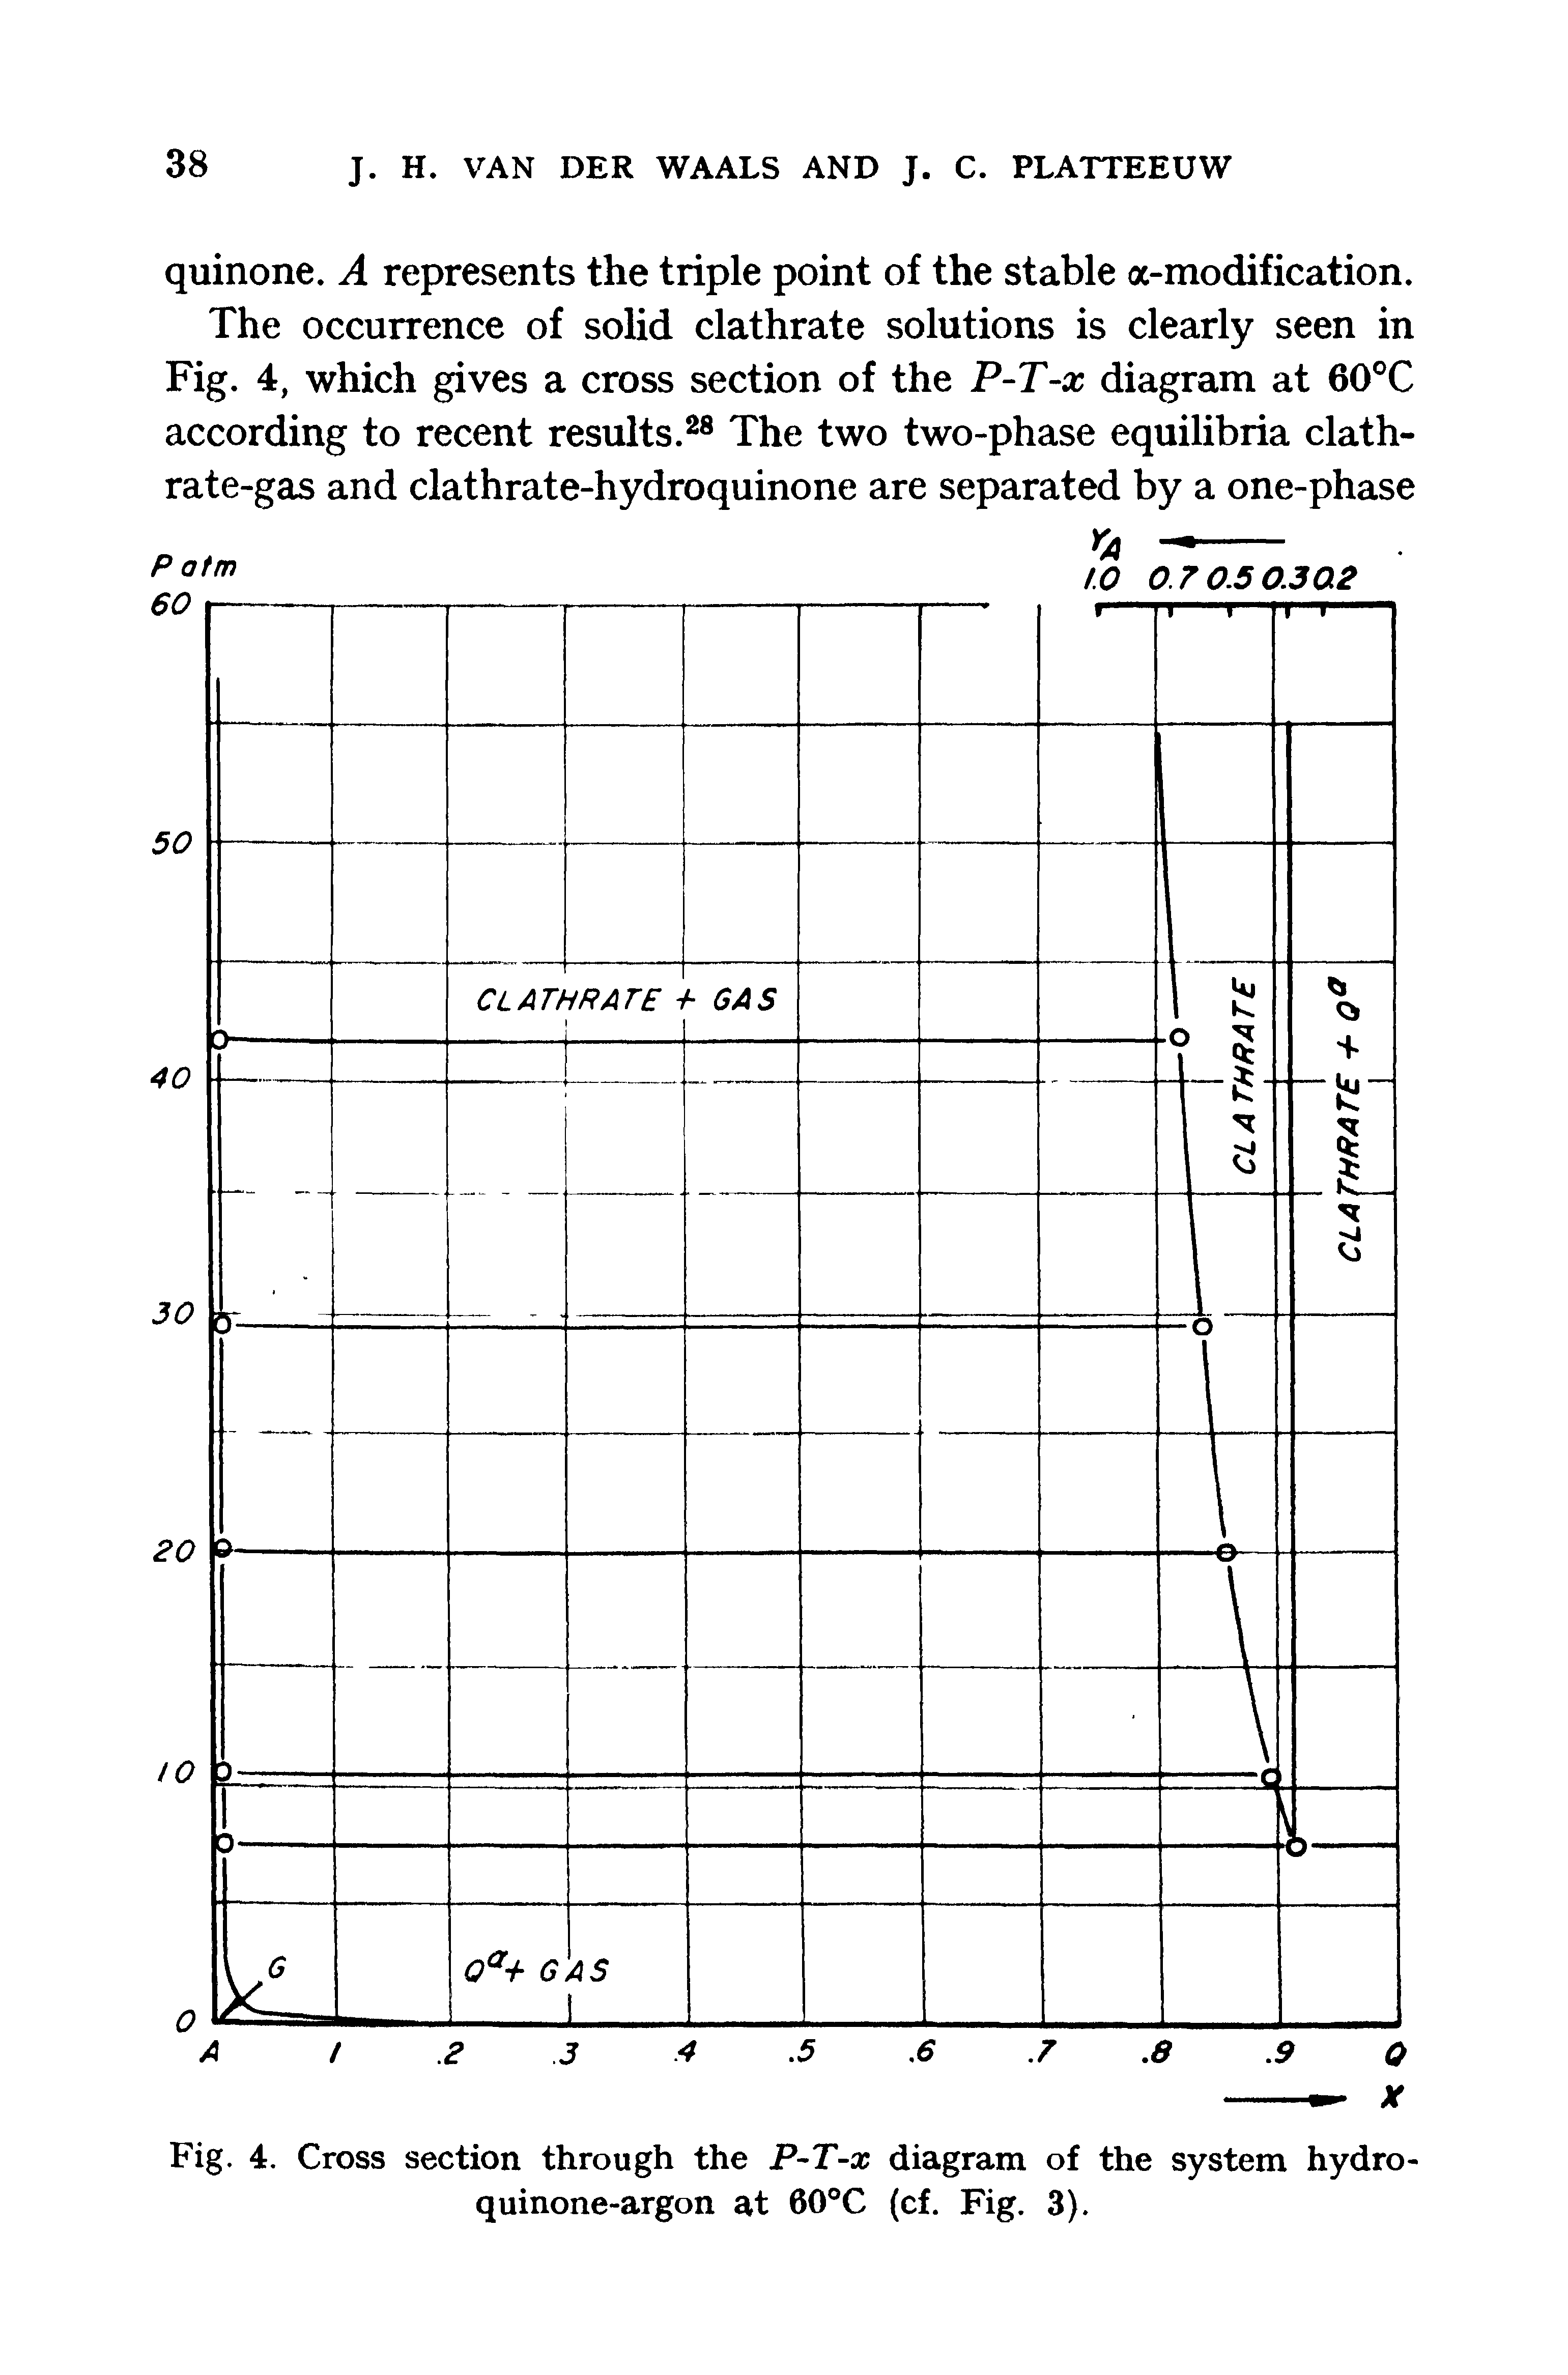 Fig. 4. Cross section through the P-T-x diagram of the system hydro -quinone-argon at 60°C (cf. Fig. 3).